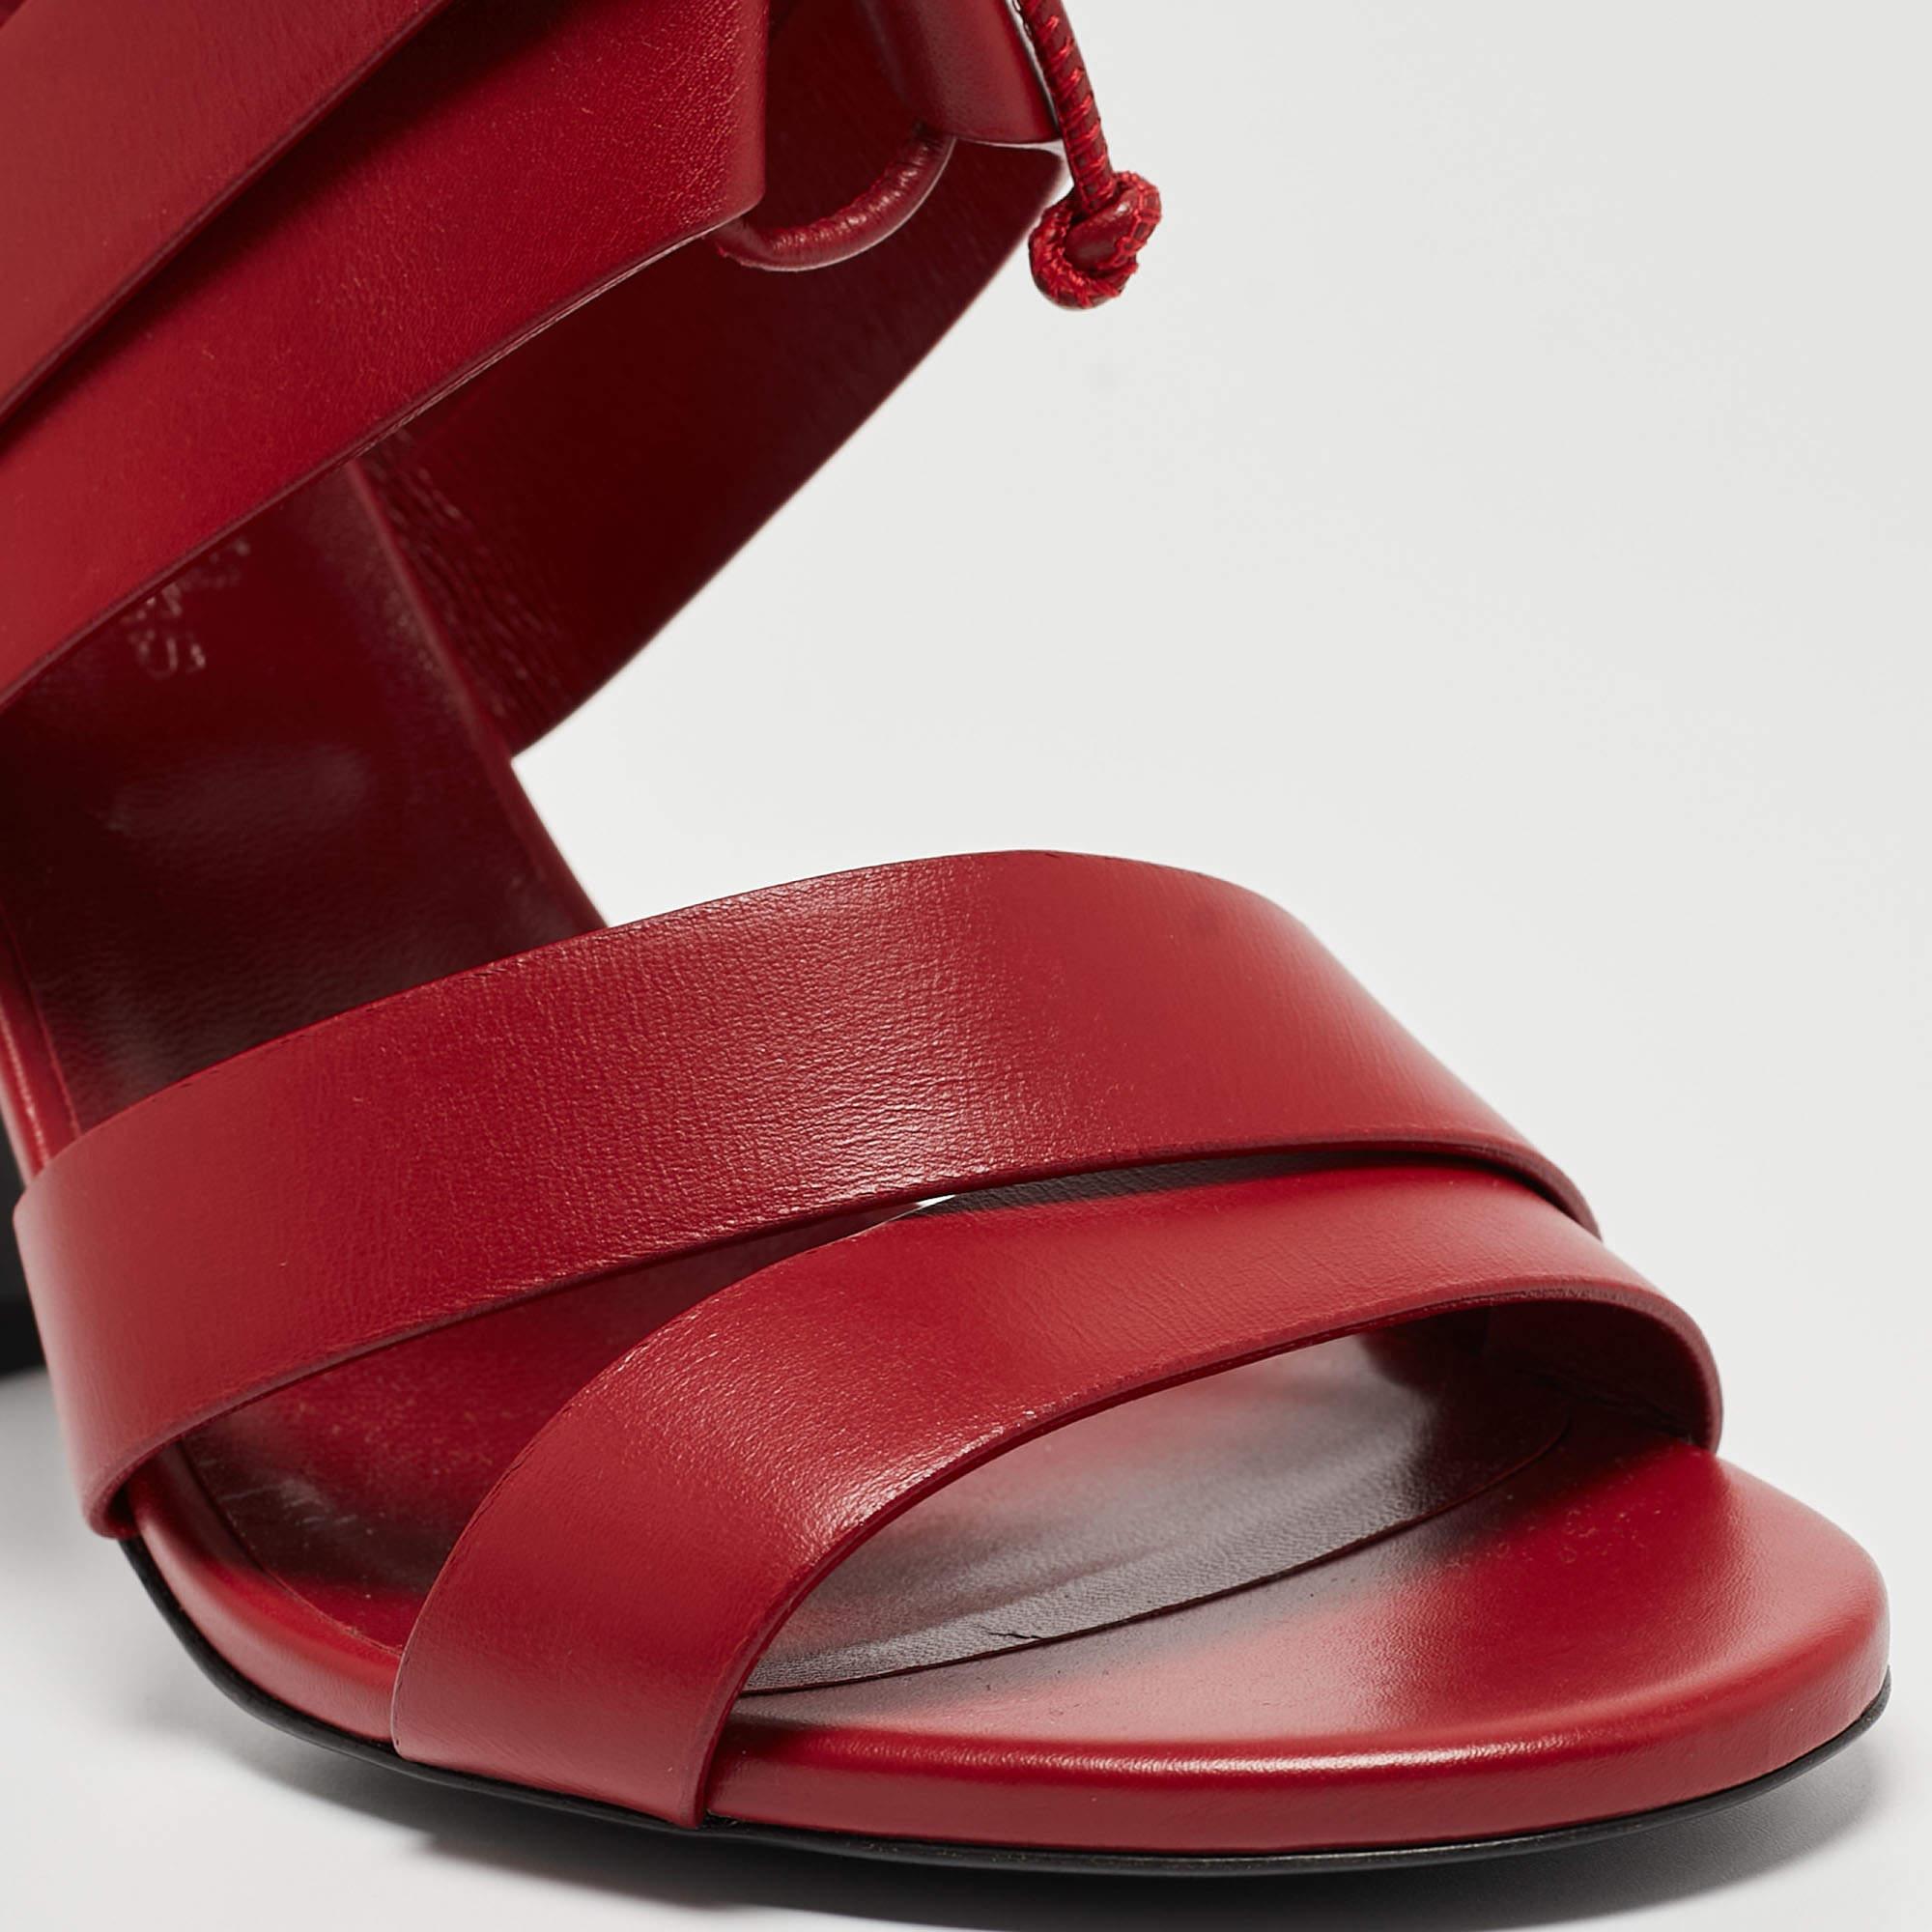 Hermes Dark Red Leather Ankle Strap Sandals Size 38 4